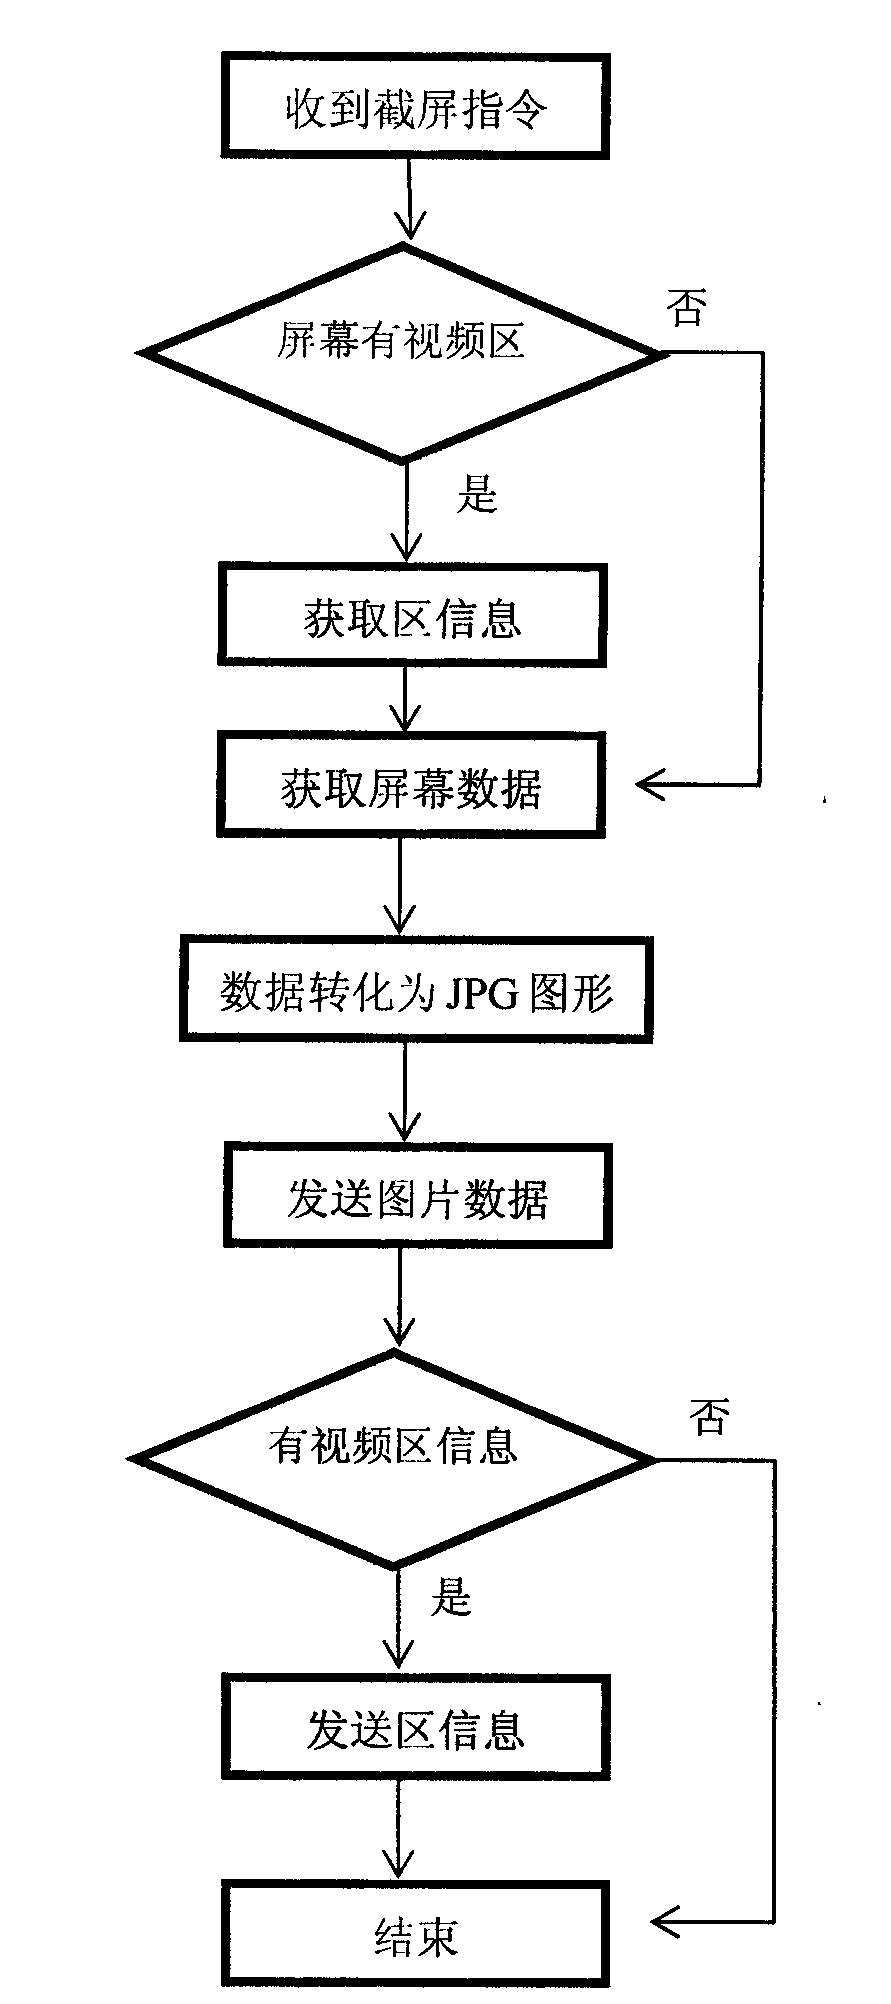 Method for locally monitoring multimedia playing